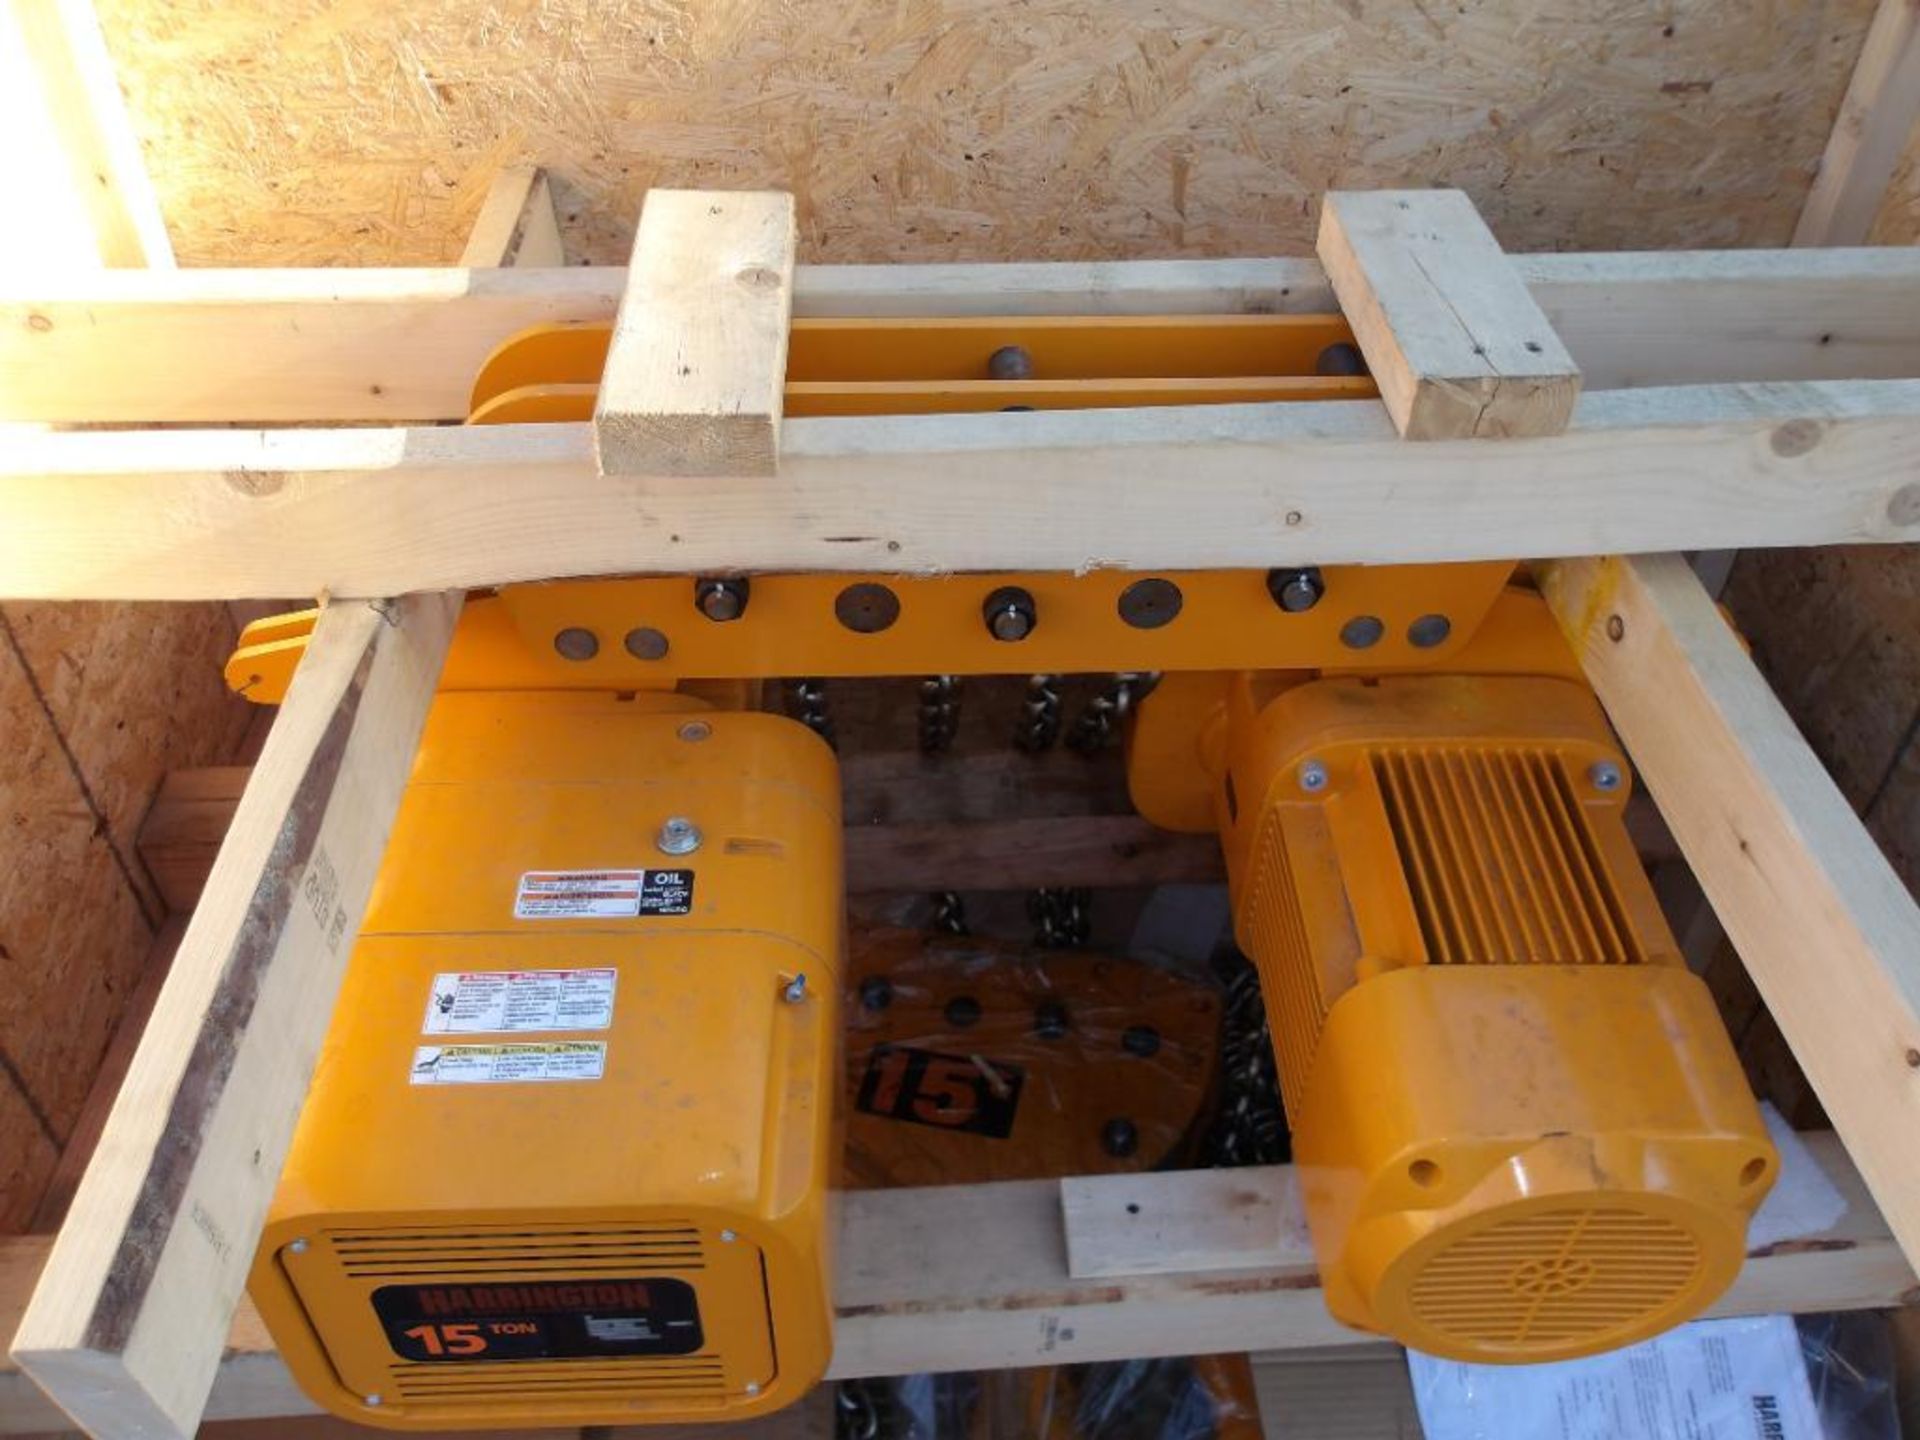 Harrington Electric 15-Ton Chain Hoist, Code: NER2020LD, S/N 330987 (New in Crate) - Image 4 of 4